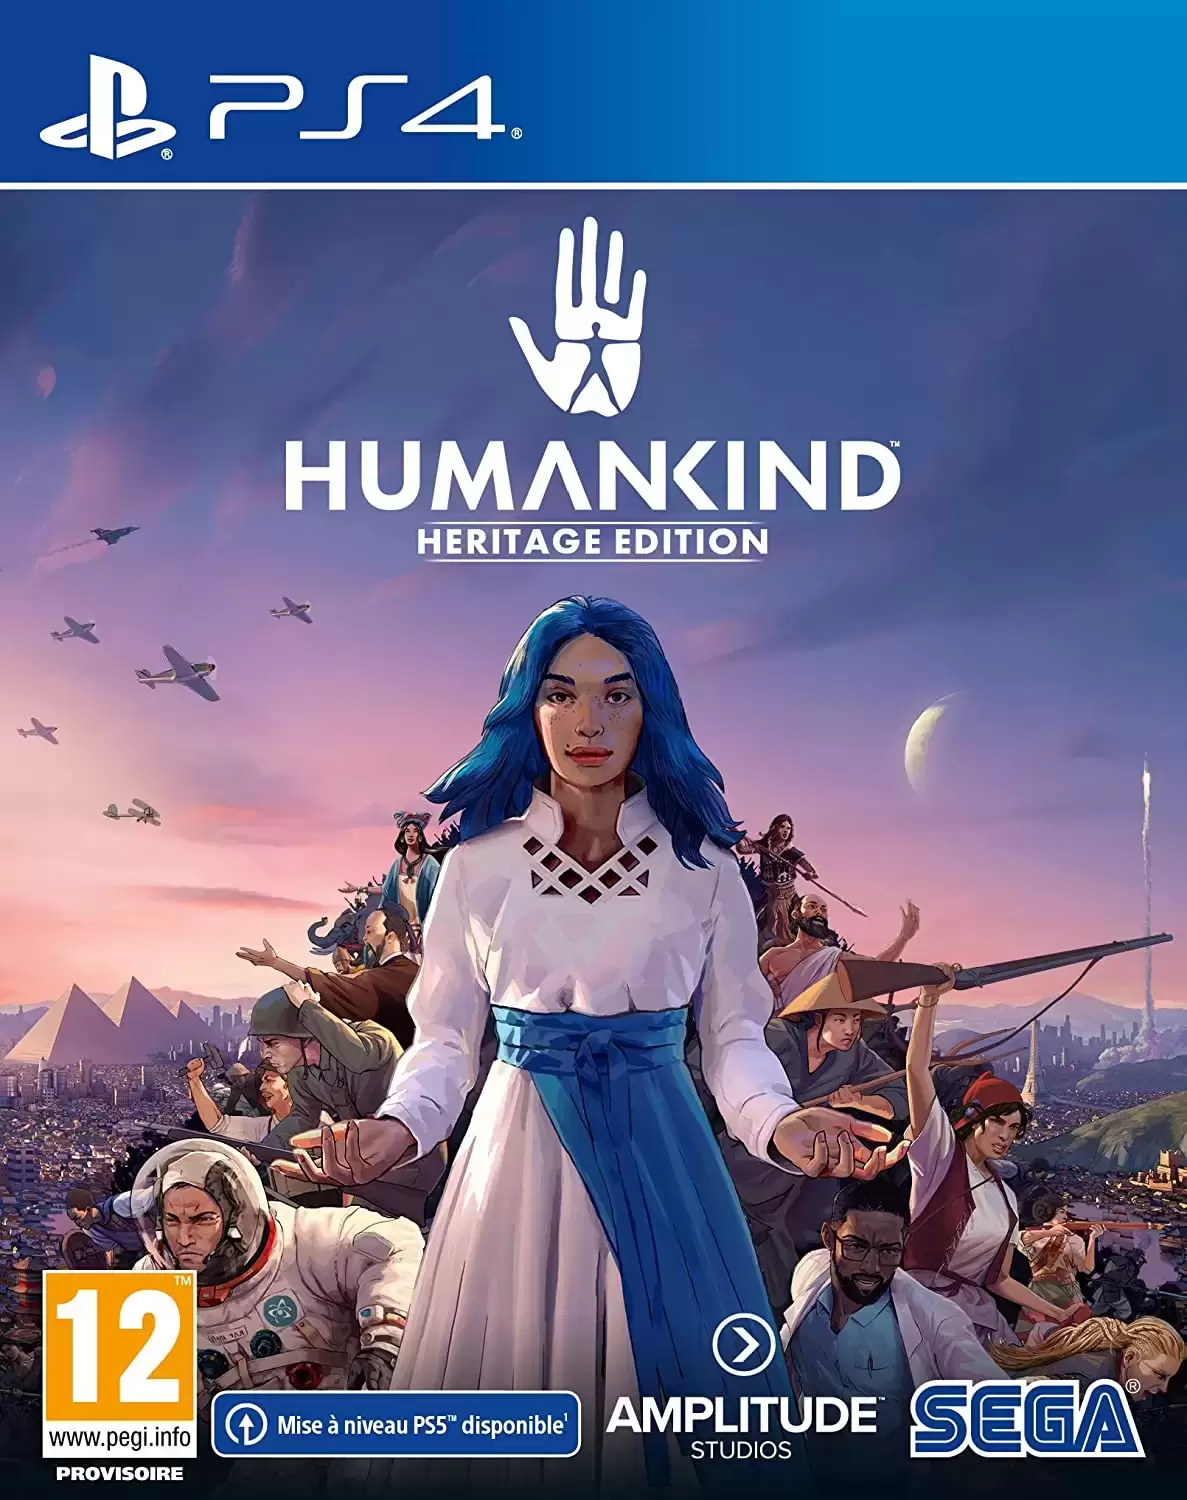 PS4 Games - Humankind - Heritage Edition